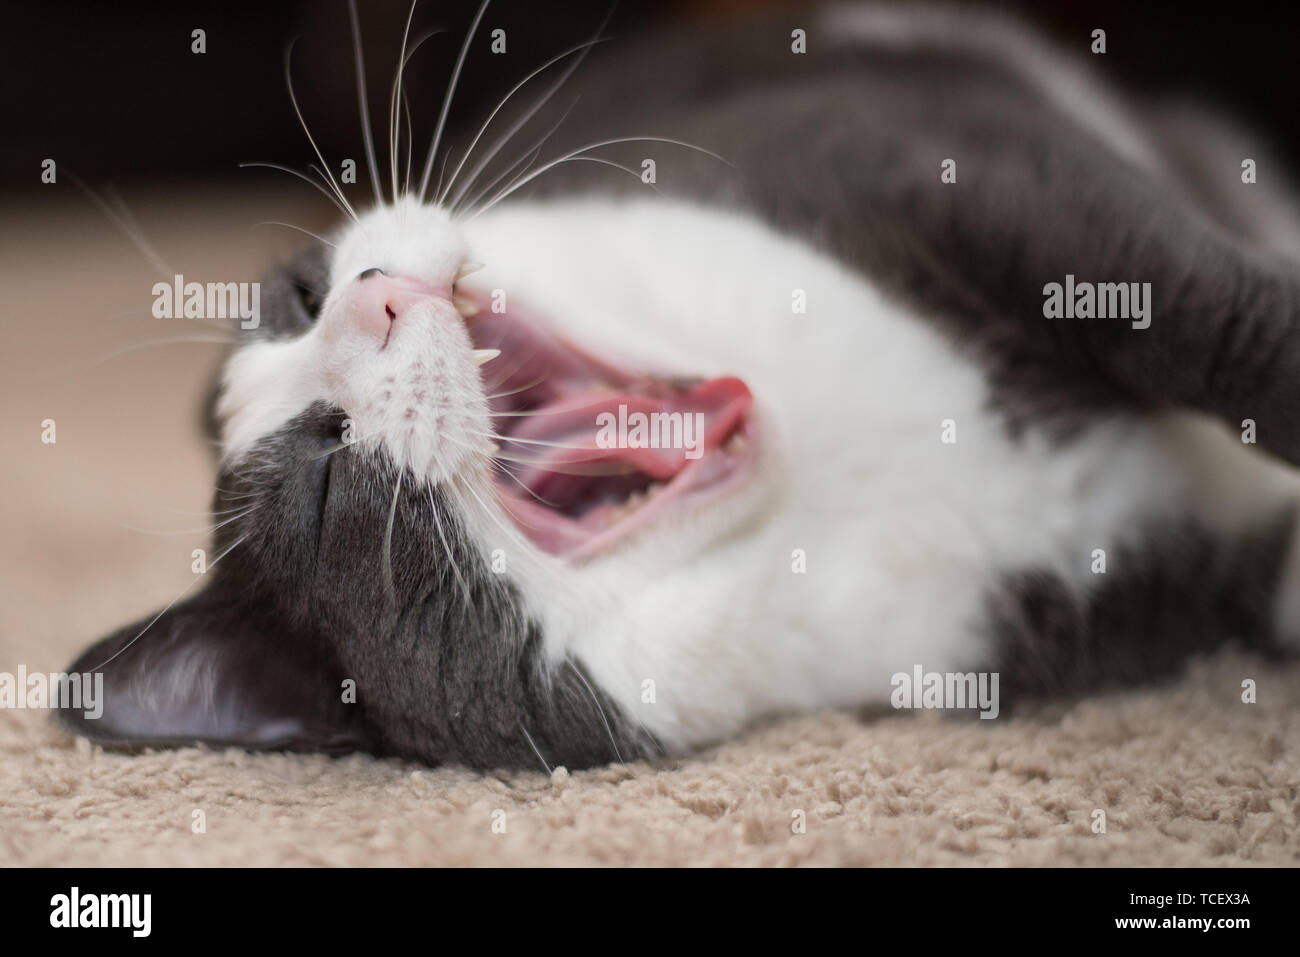 A white and grey cat rolling around on carpet eyes closed opening mouth wide Stock Photo